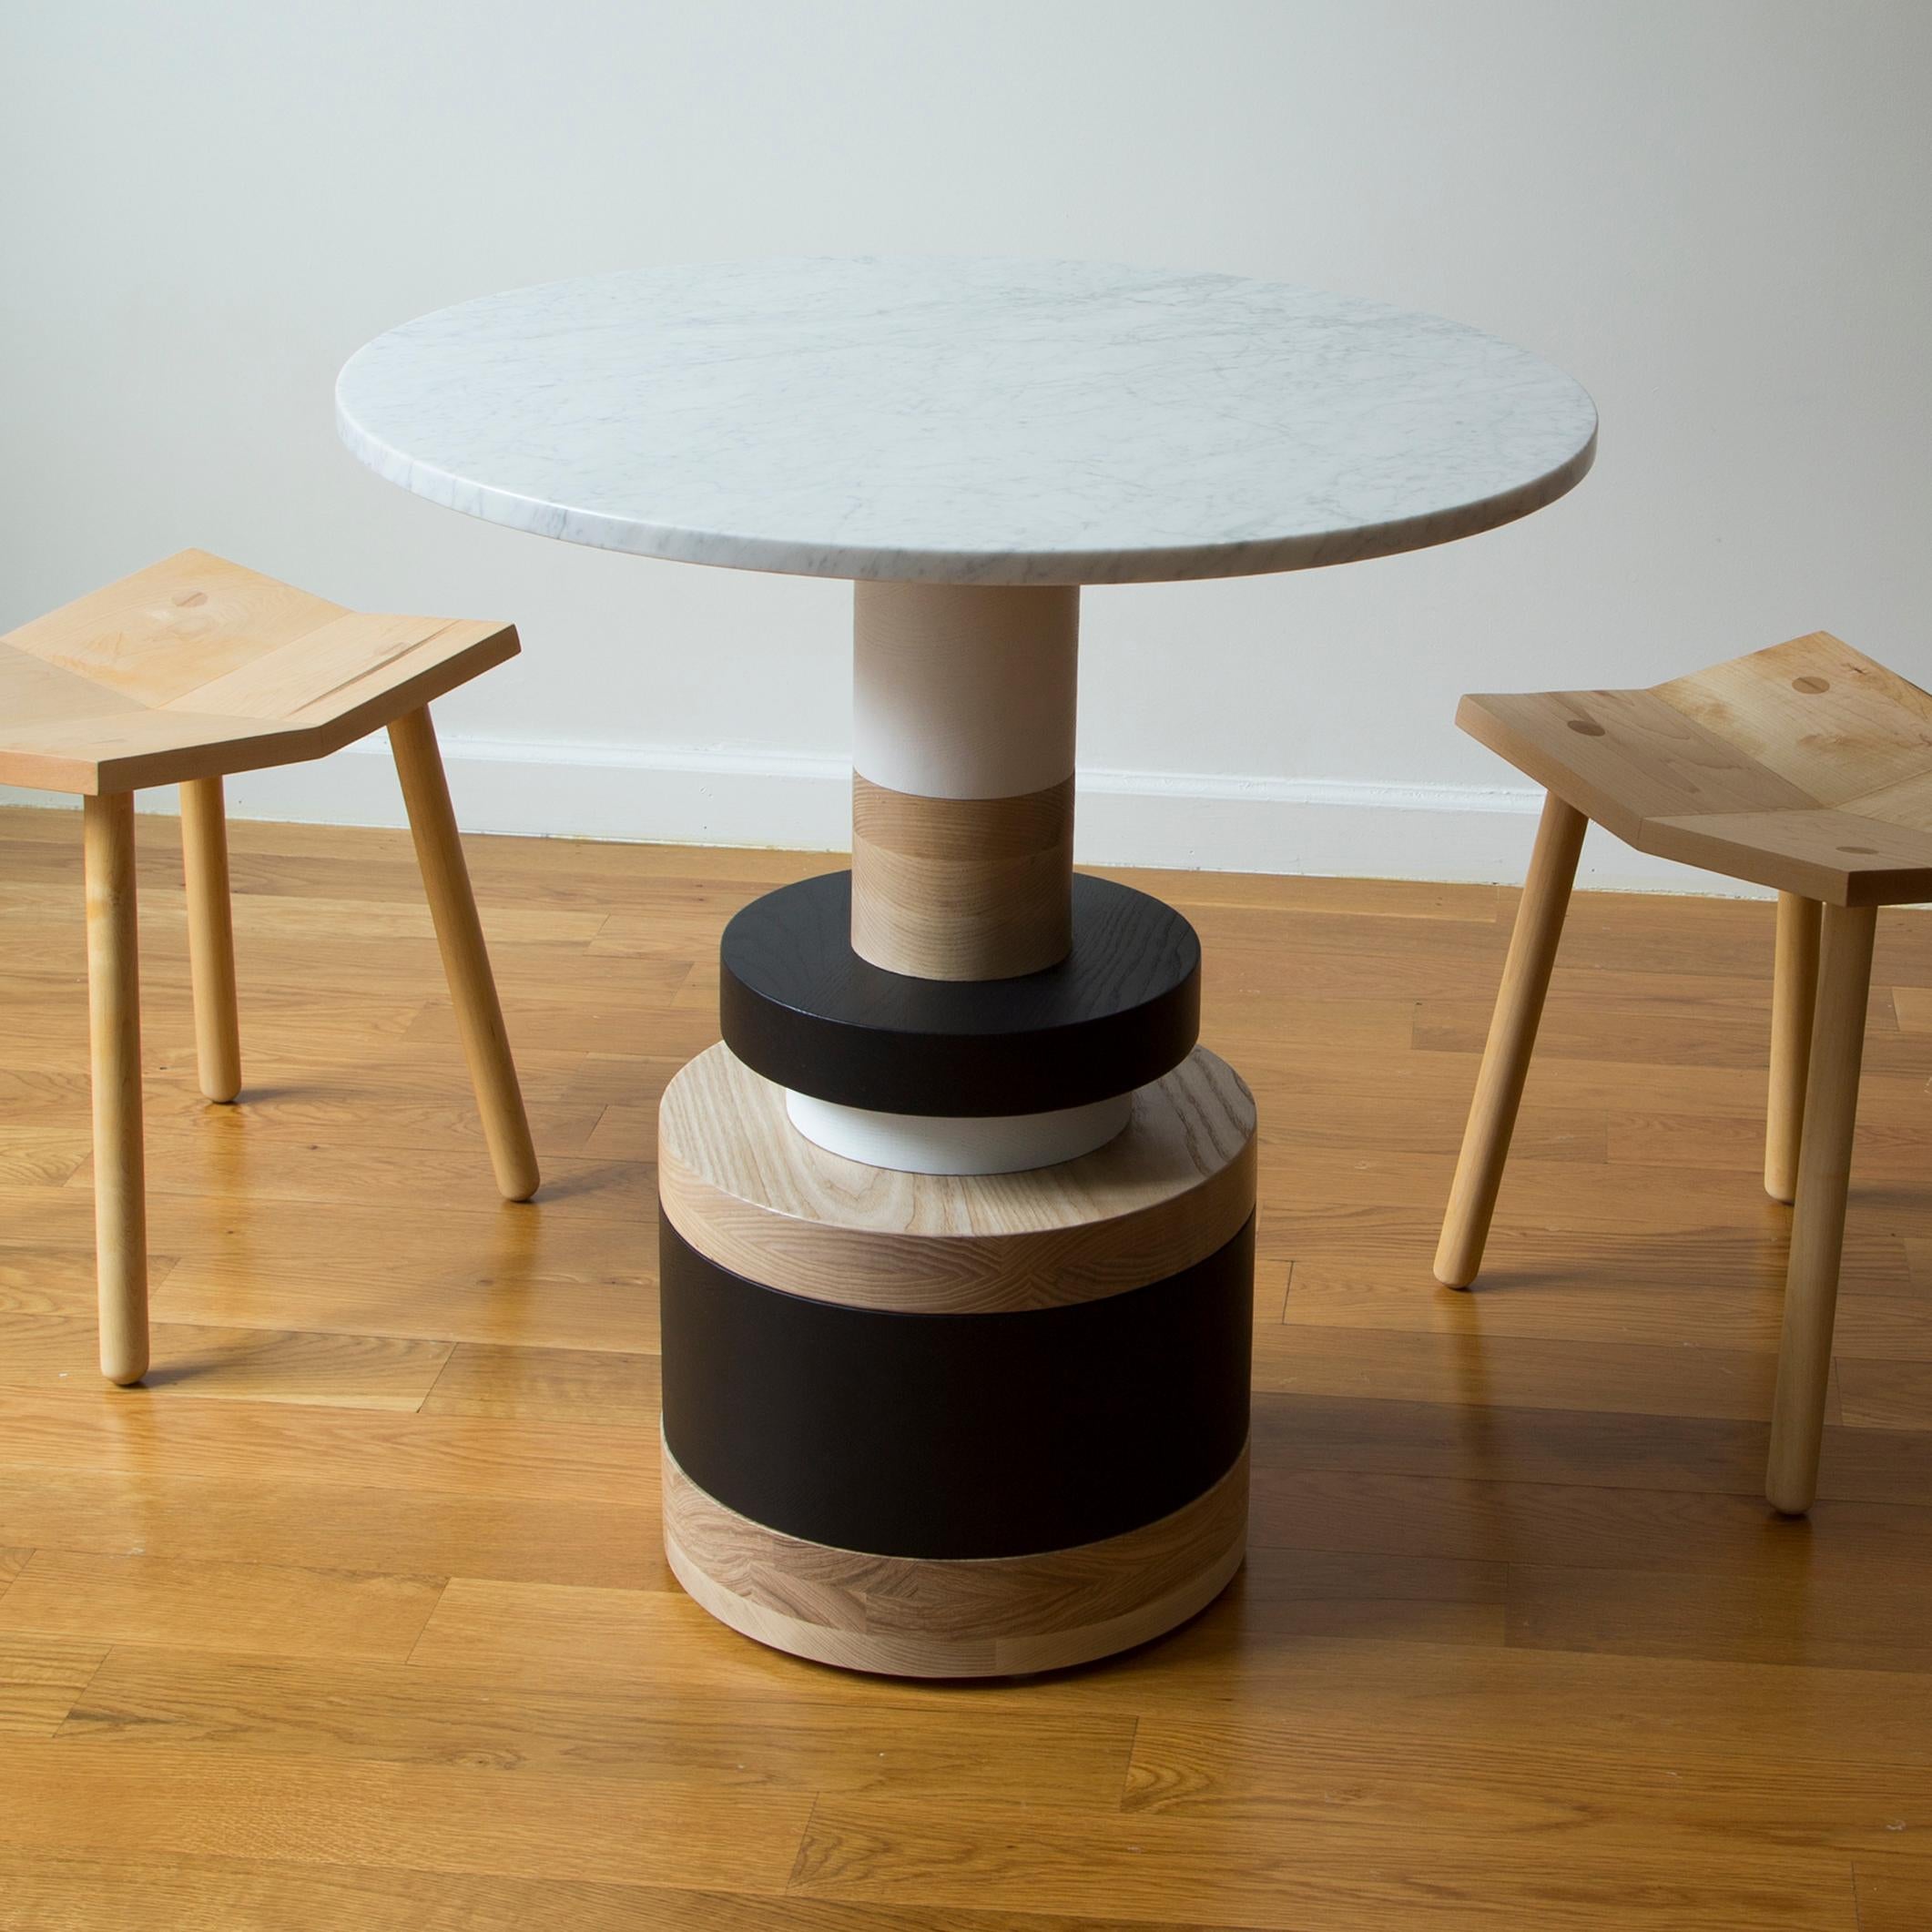 The Sottsass-inspired “Sass Dining Table” is a bold, graphic statement piece. A polished Nero Marquina marble top sits on an Amish-made base composed of painted and stacked wood circles. 

The version as shown is 30